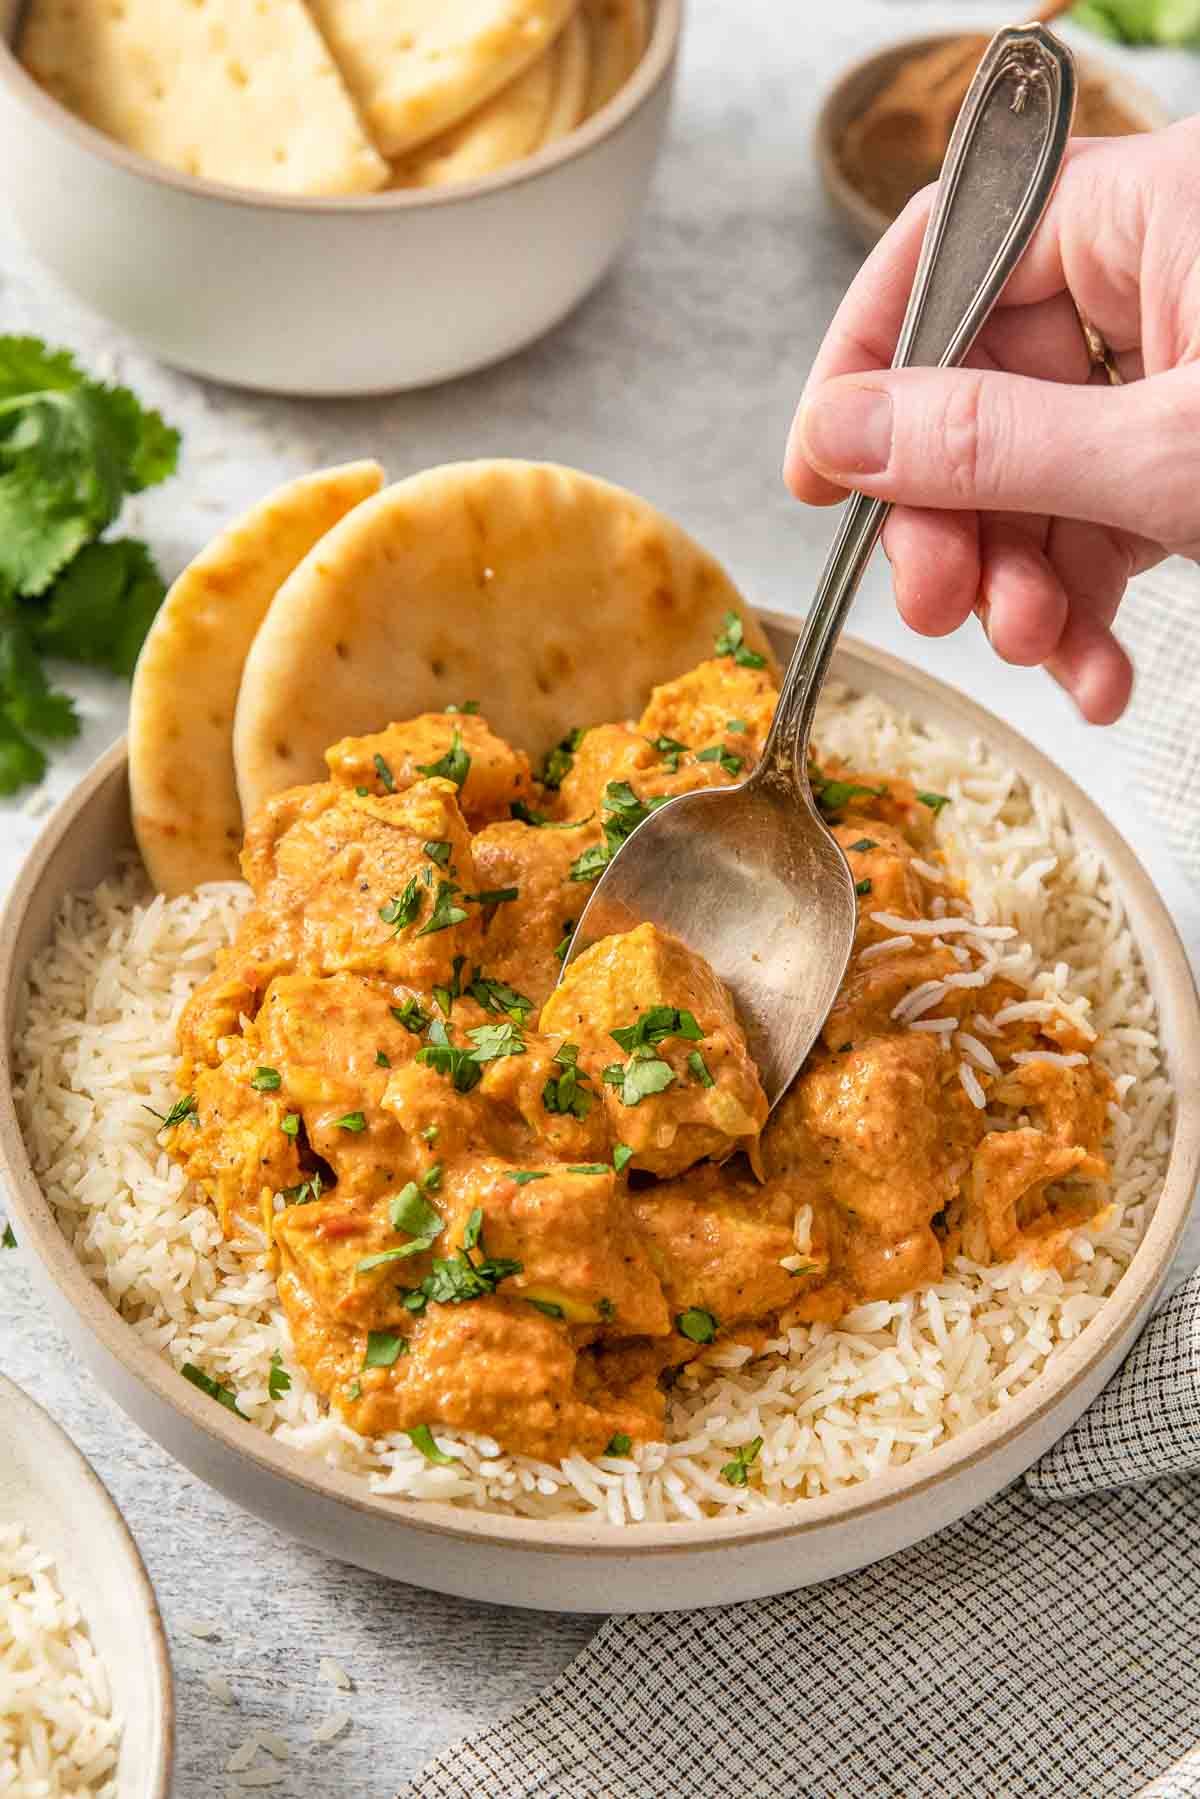 A bowl of a butter chicken recipe over rice with naan bread on the side.